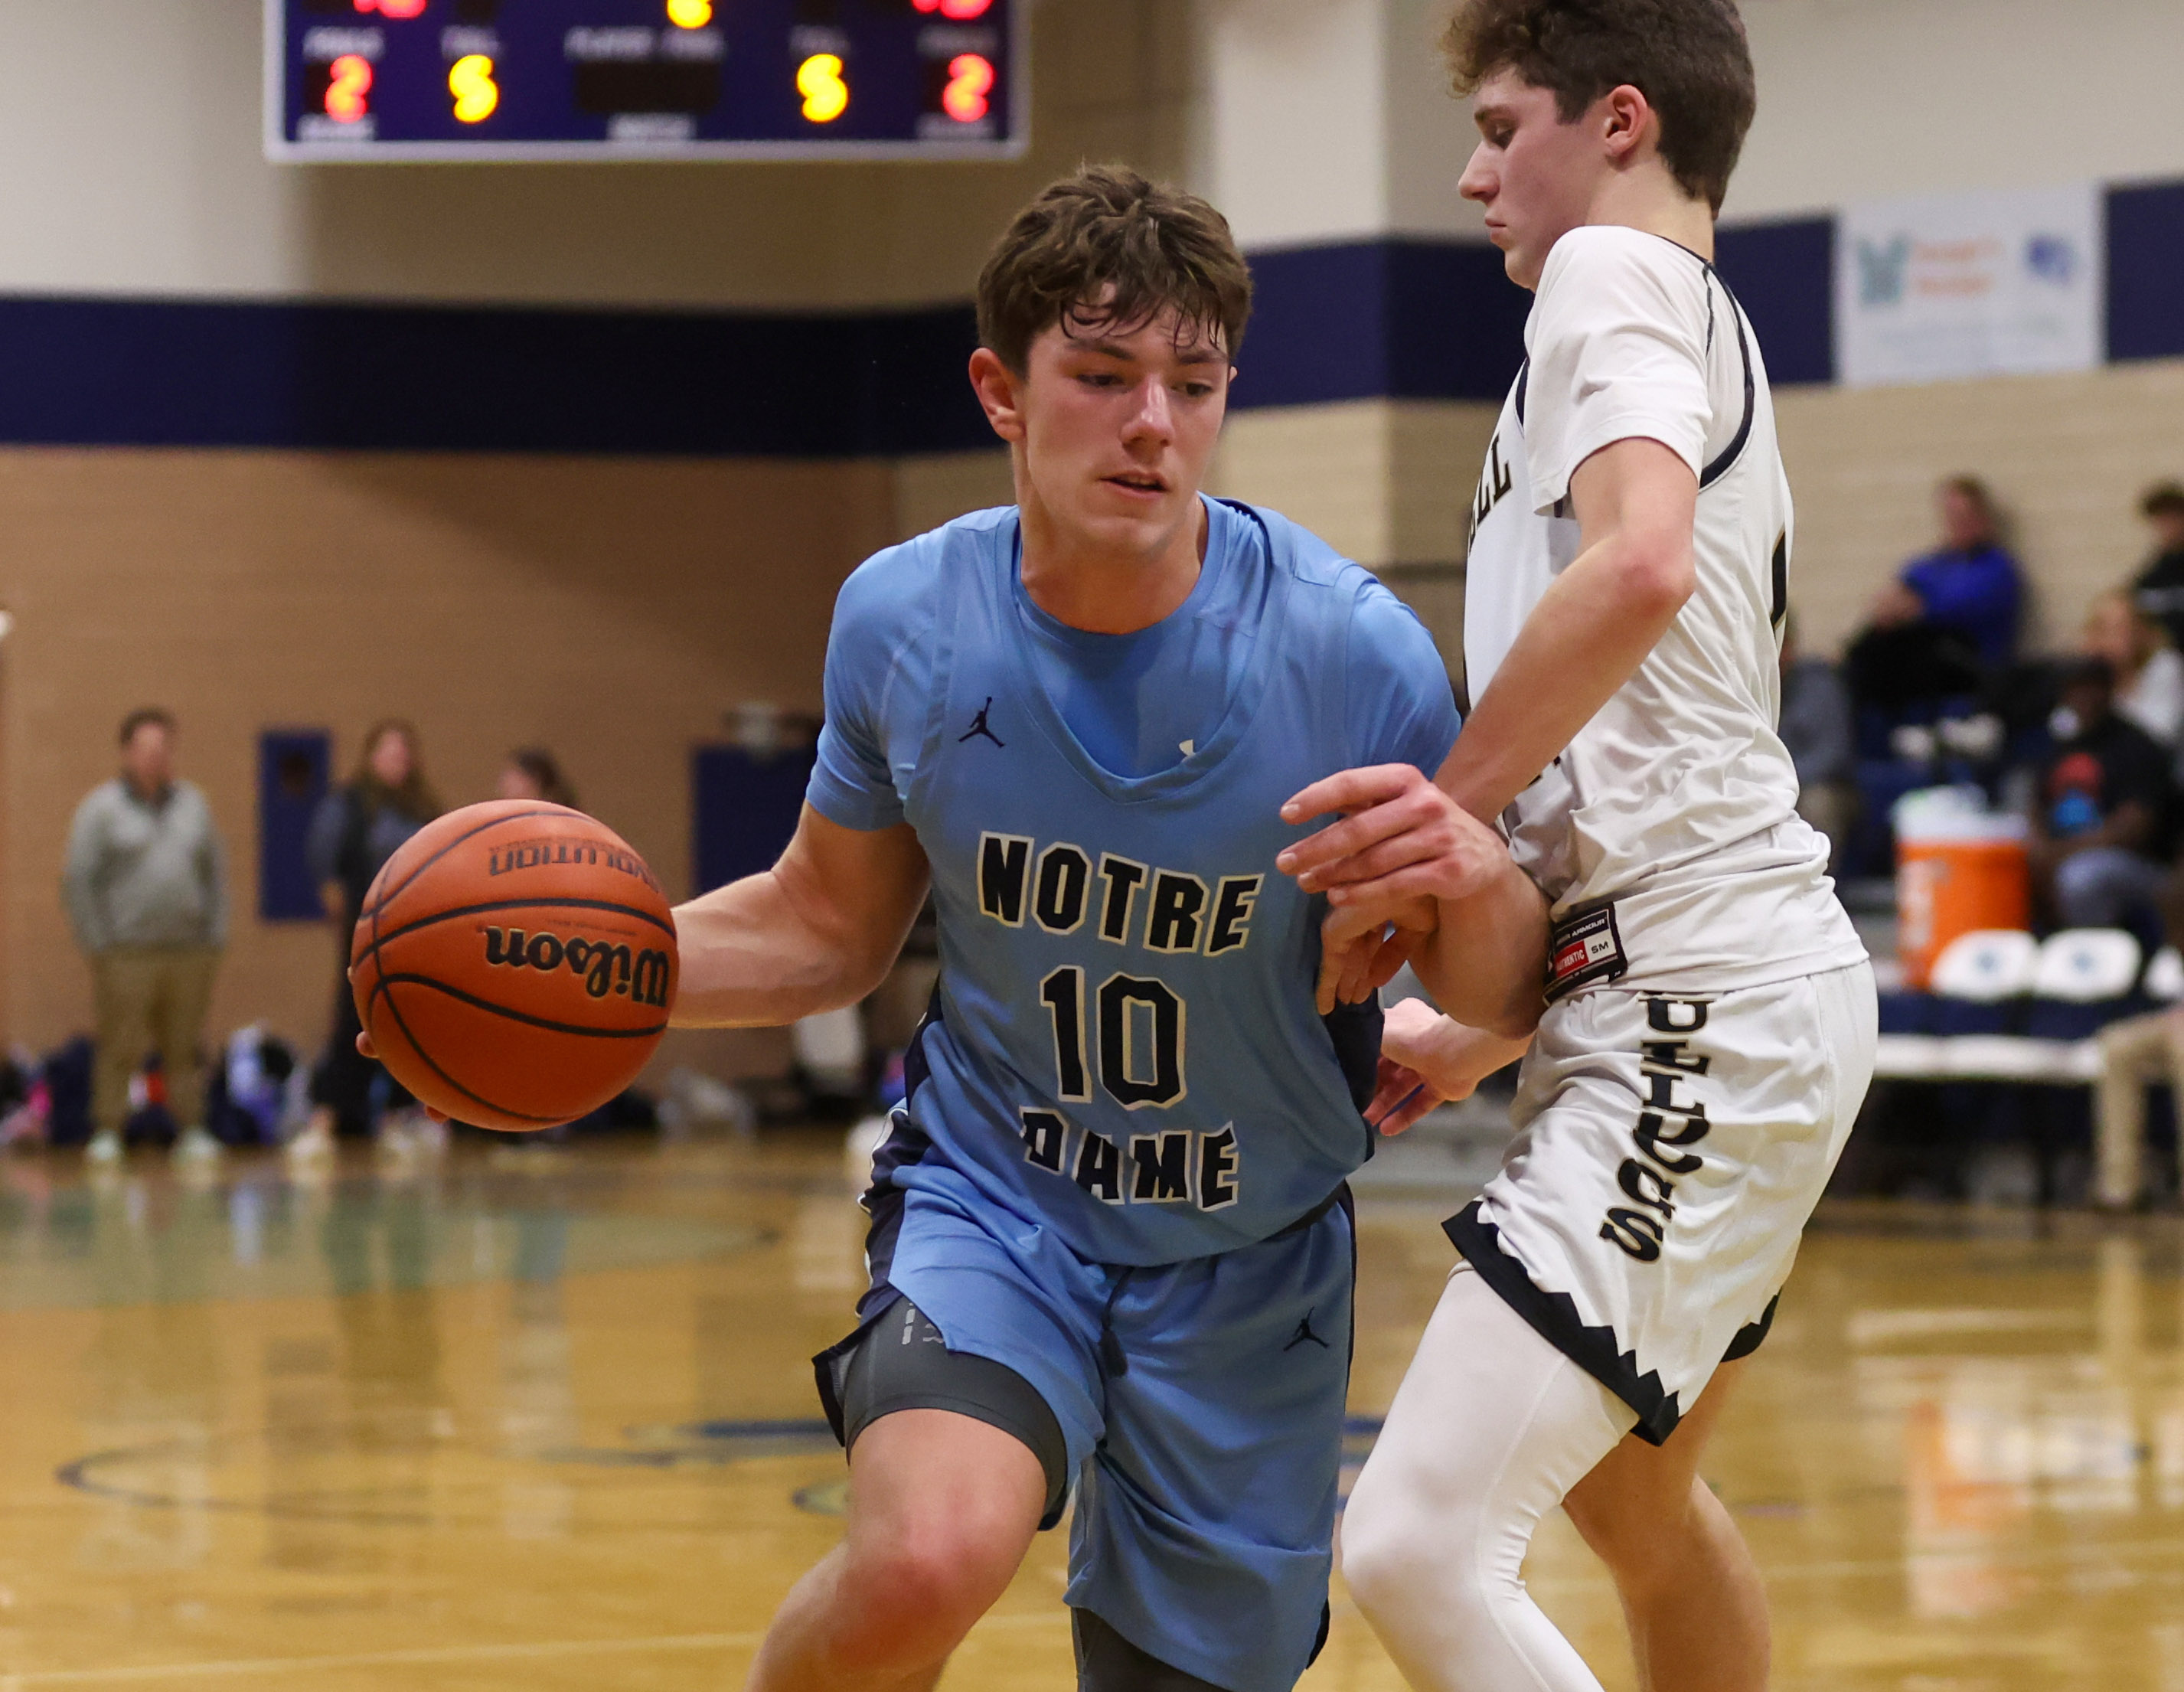 Boys basketball: Hopewell Valley at Notre Dame - nj.com